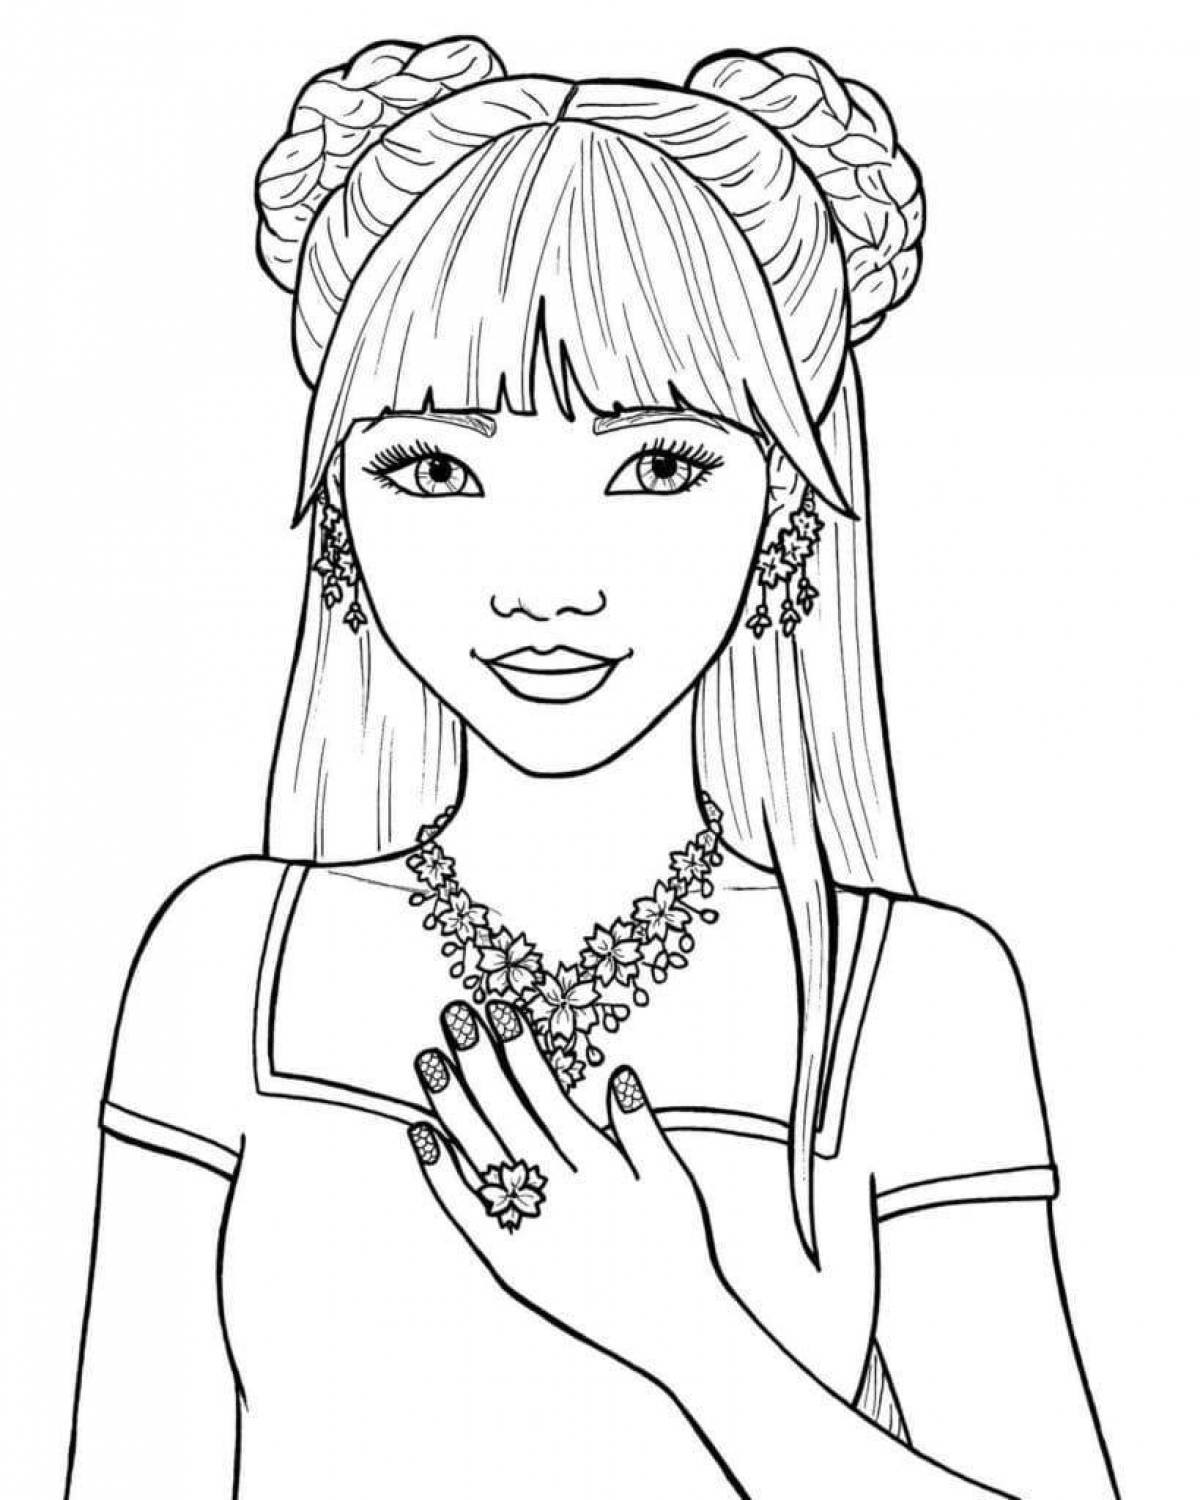 Creative coloring book for teenage girls